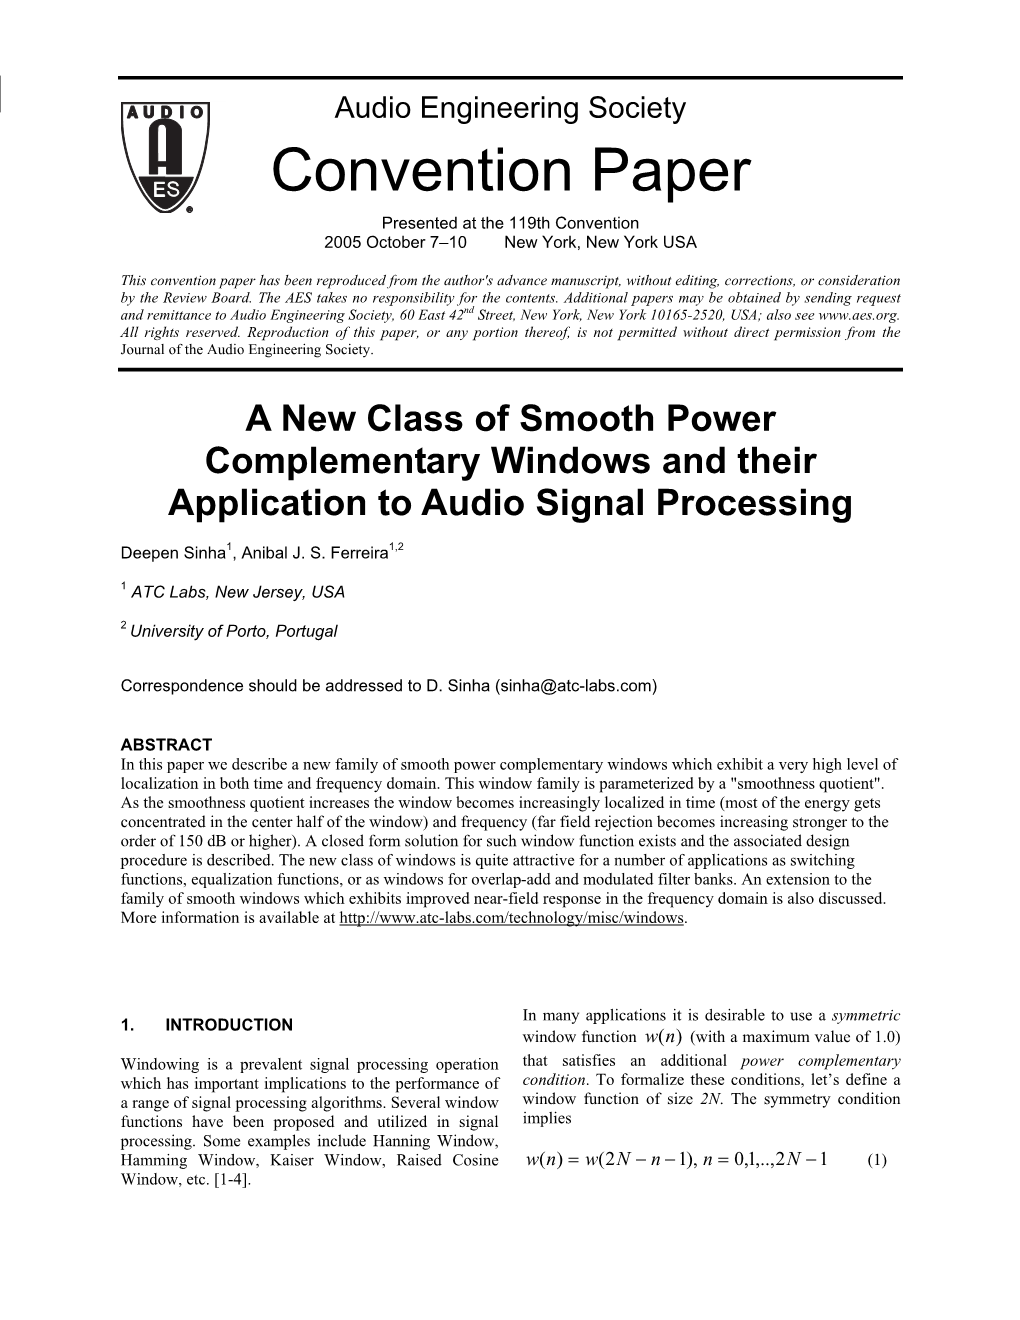 A New Class of Smooth Power Complementary Windows and Their Application to Audio Signal Processing